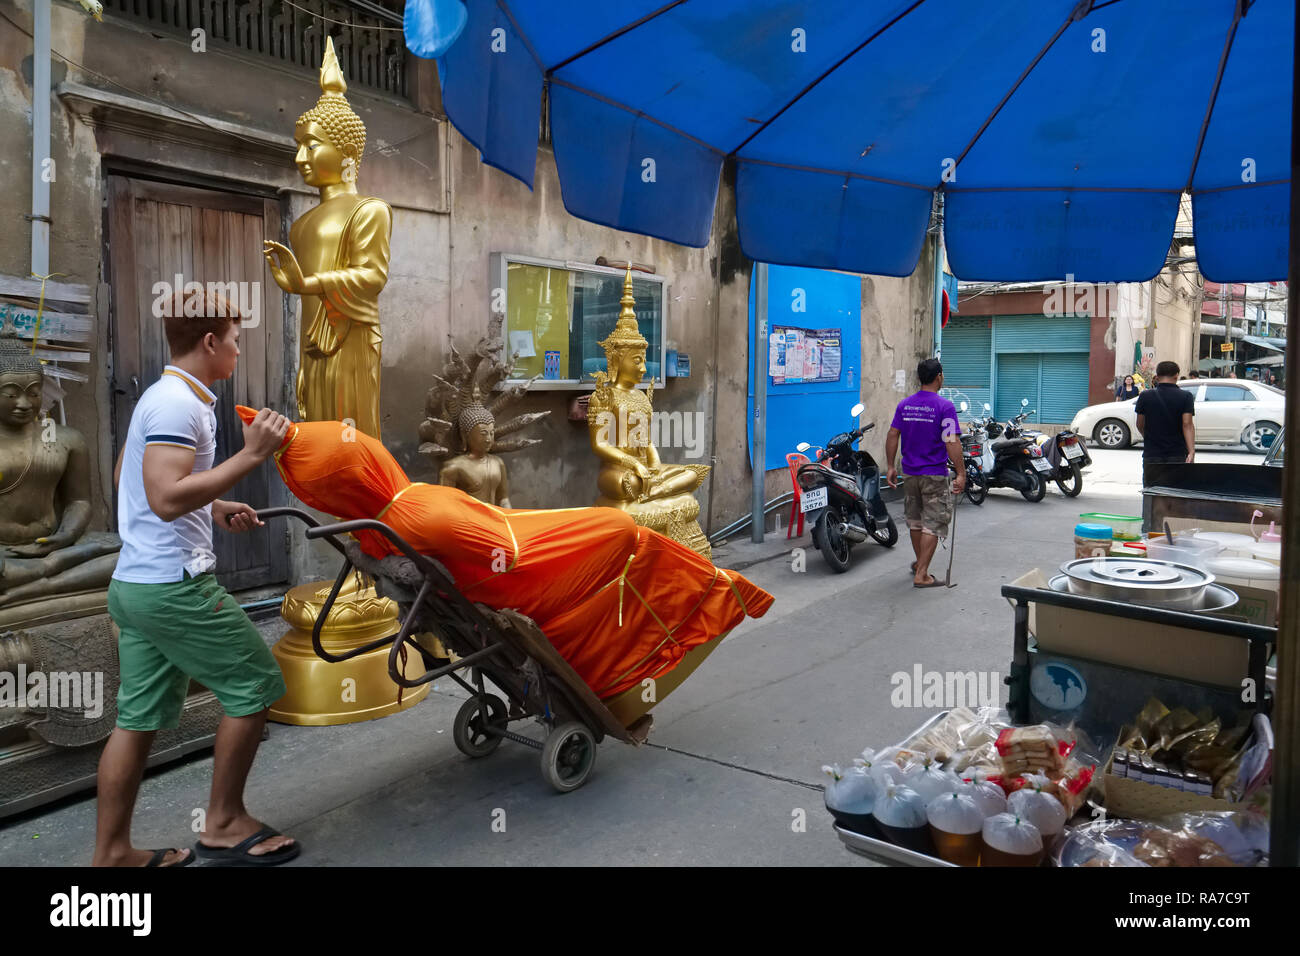 An employee of a factory for Buddha statues rolls out a new Buddha, respectfully wrapped in orange cloth; Bamrung Muang Road, Bangkok, Thailand Stock Photo